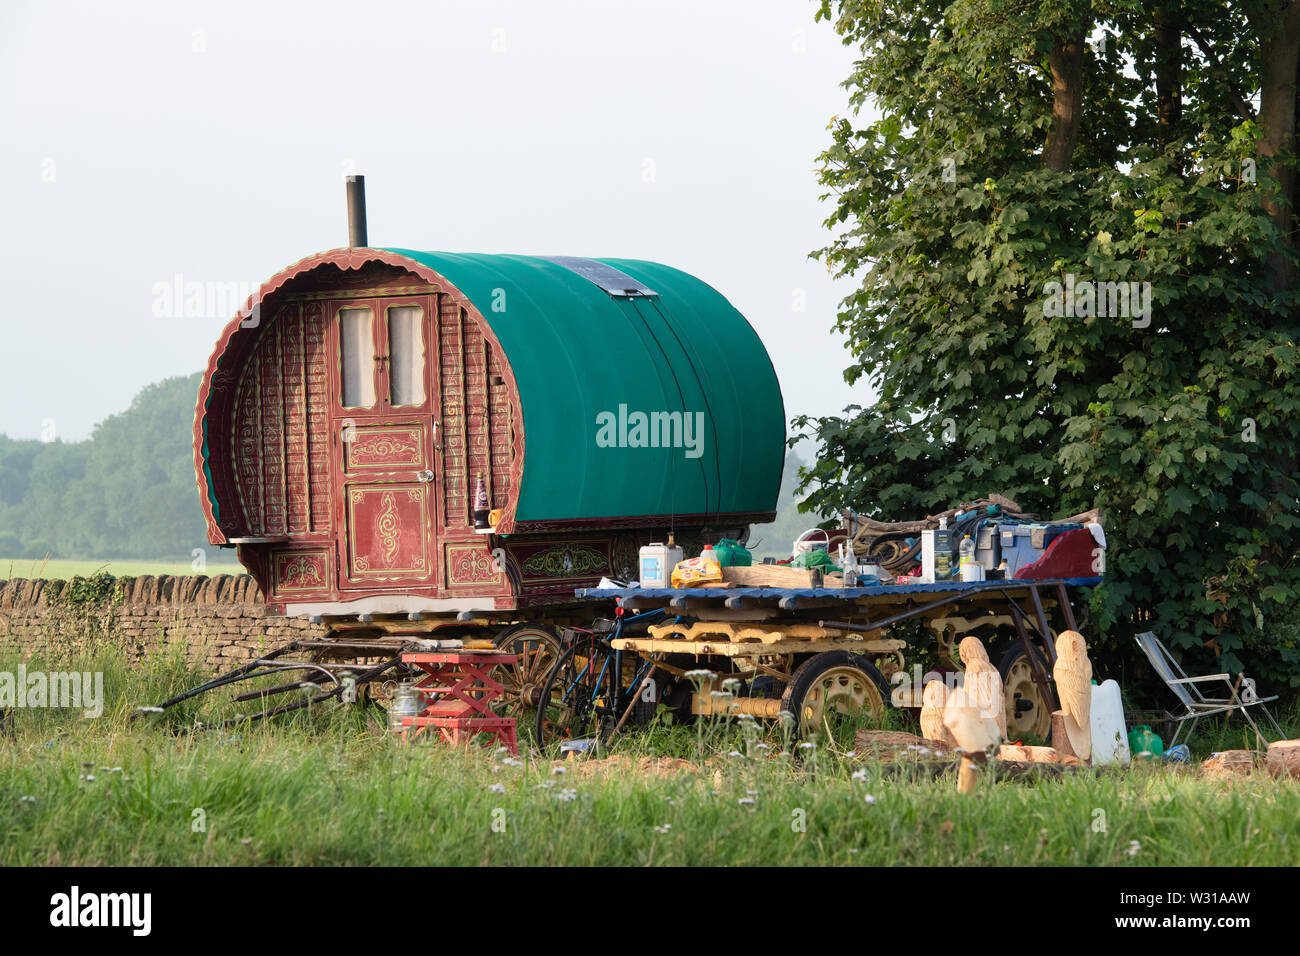 Gypsy caravan on the side of a road near Woodstock, Oxfordshire, England Stock Photo